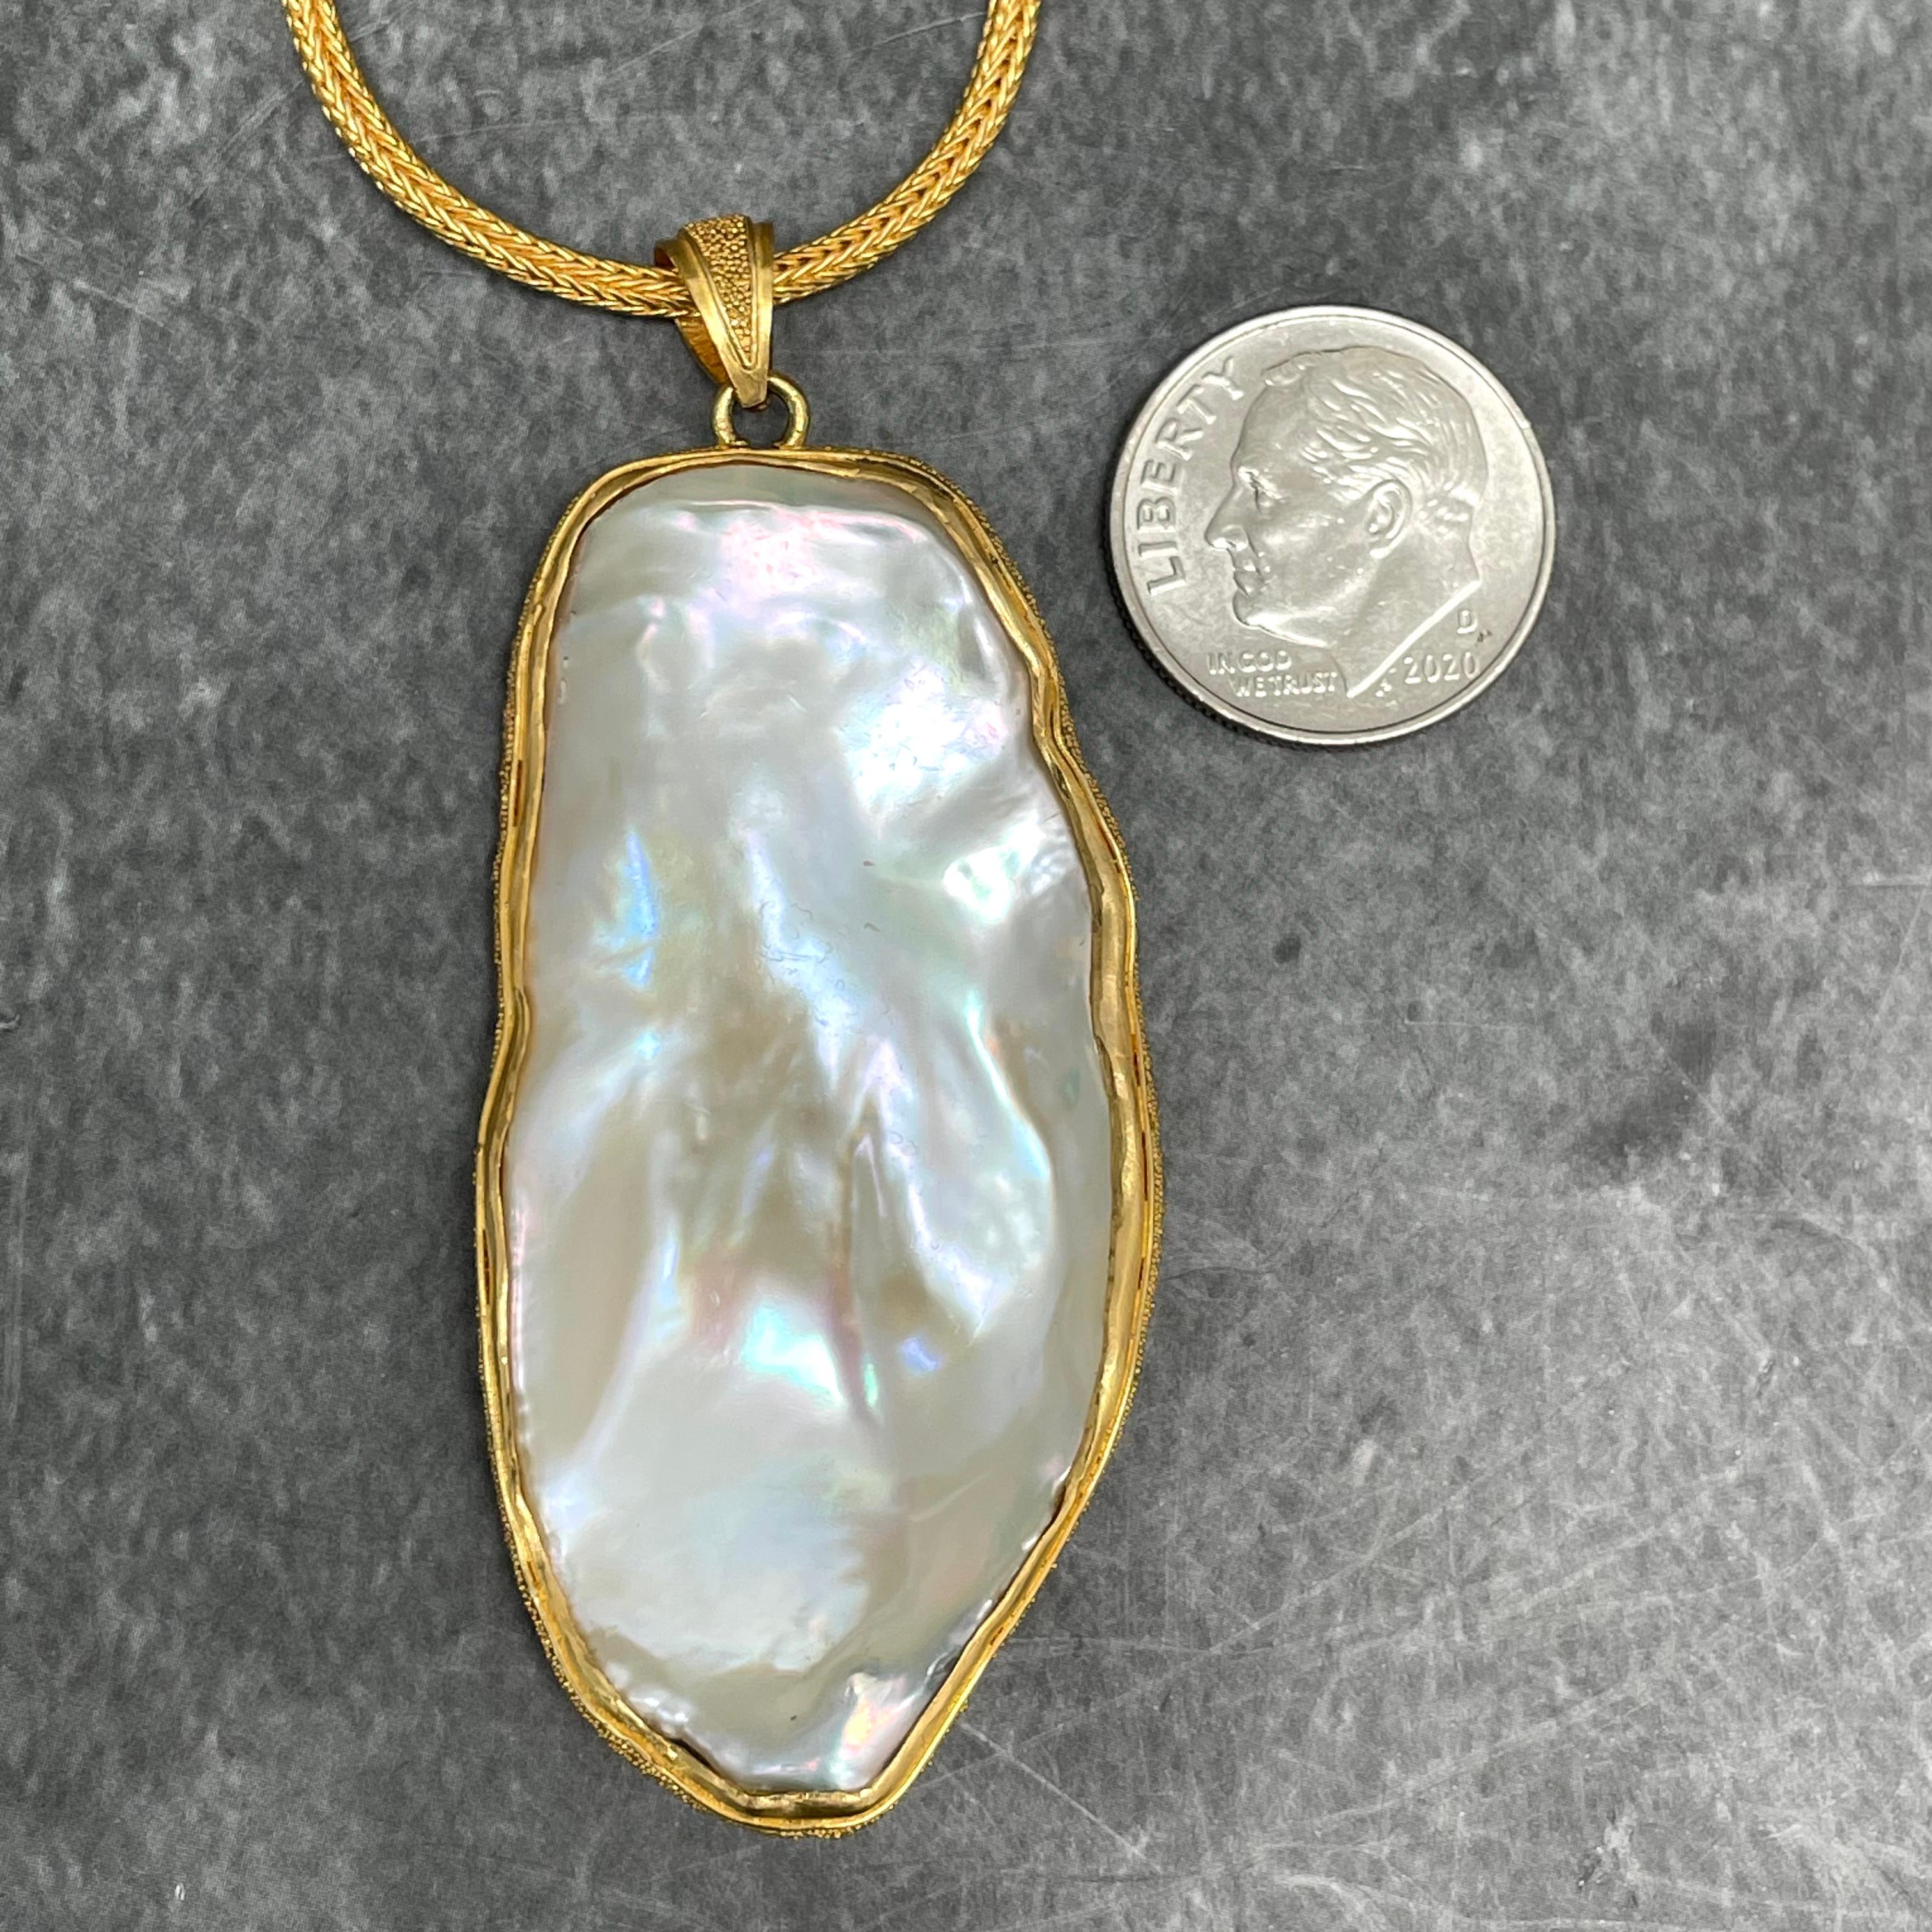 A lustrous, approximately 25 x 50 mm flattish white freshwater pearl is held with rich 22K gold accented with delicate 